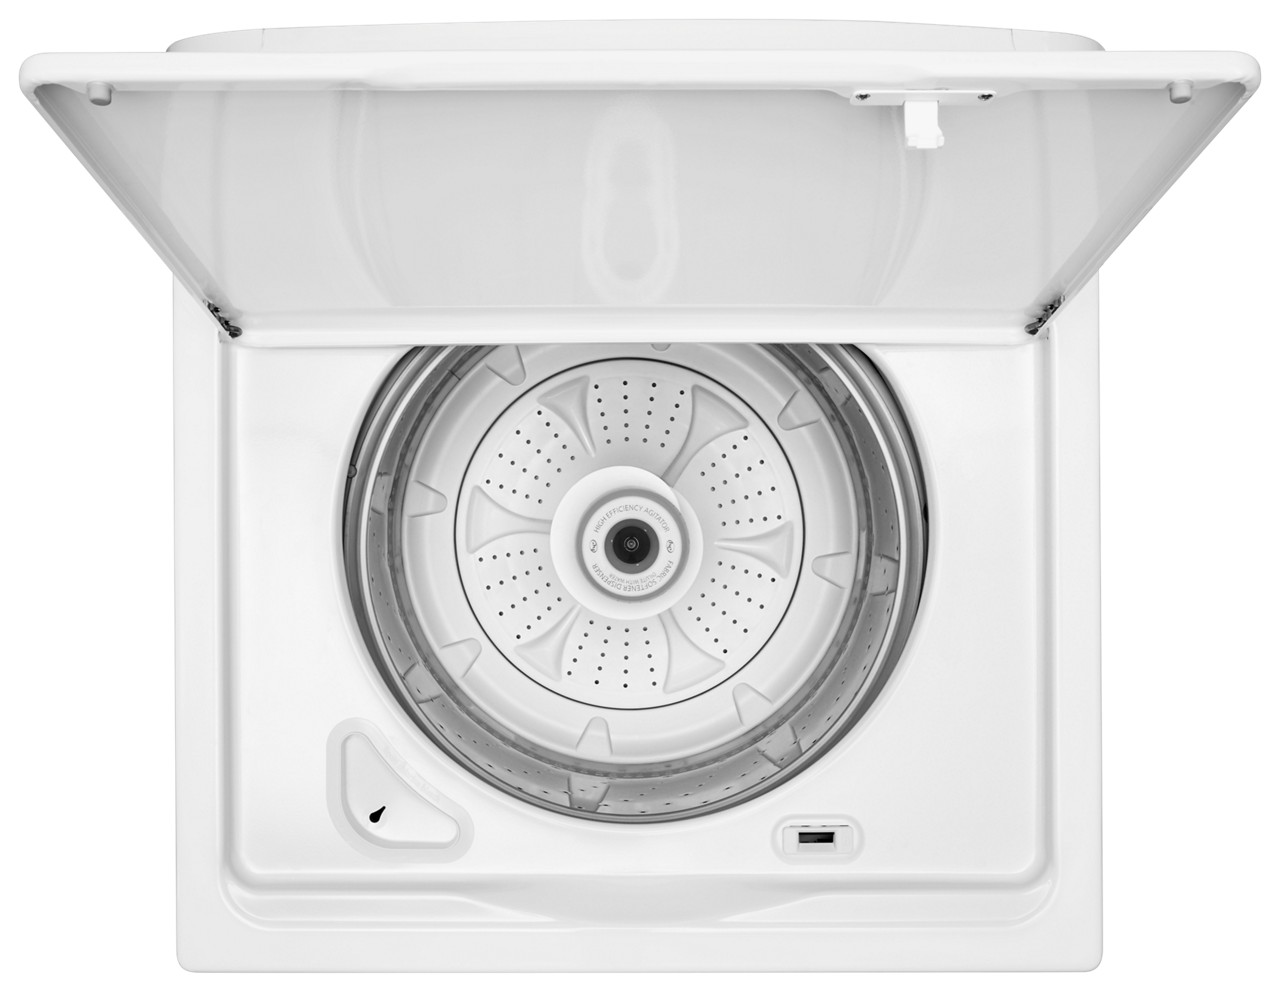 Speed Queen TR7003WN 26 inch ; Top Load Washer with 3.2 Cu. ft. Capacity; 840 RPM Max Spin Speed; Digital controls; Stainless Steel Tub; in White